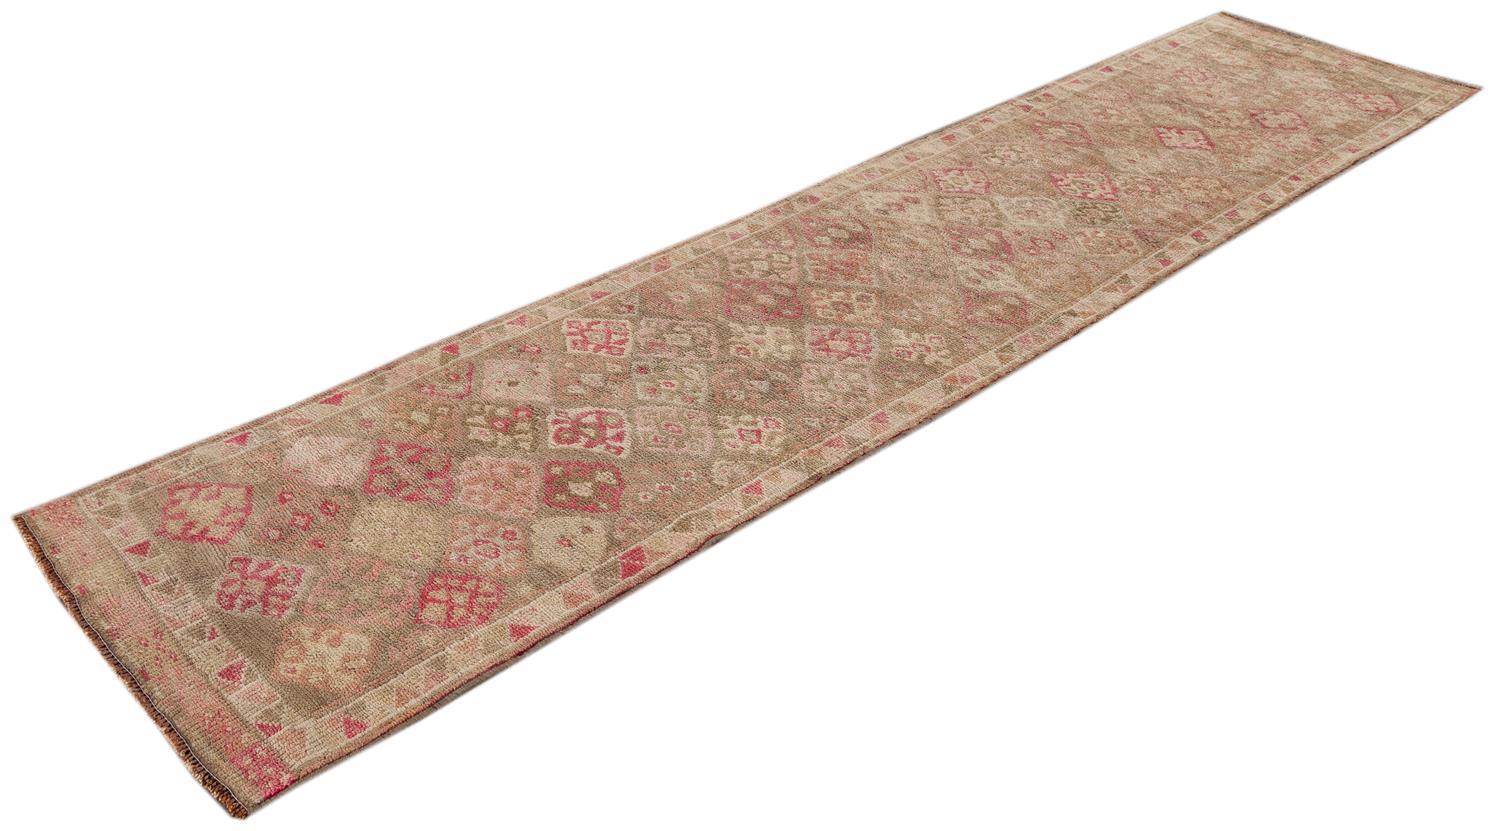 Beautiful Anatolian Village Runner rug, hand knotted with a tan field, ivory, light and bright pink accents with an all-over geometric design.

 This rug measures 2' 11